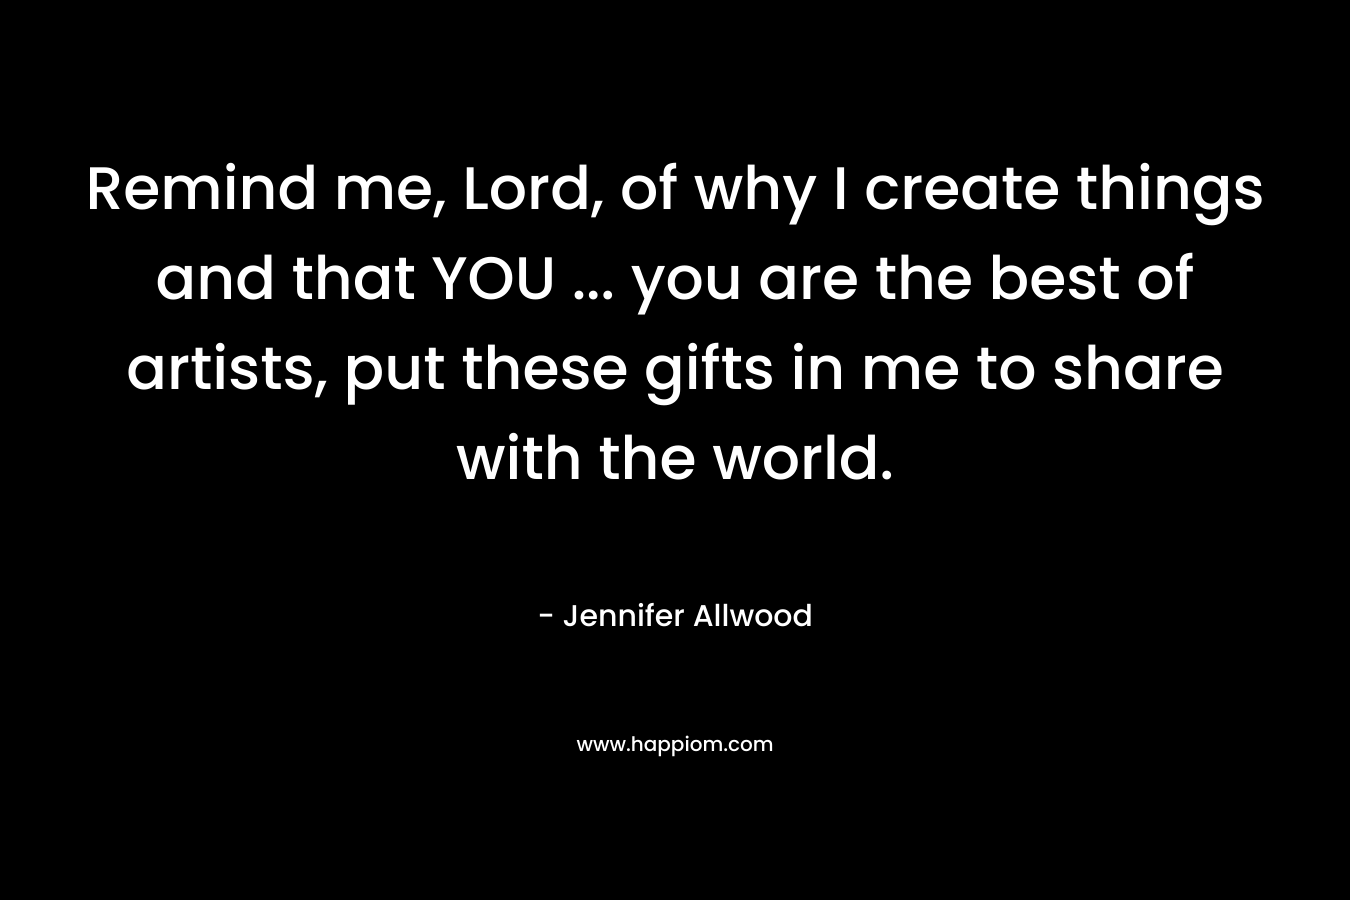 Remind me, Lord, of why I create things and that YOU … you are the best of artists, put these gifts in me to share with the world. – Jennifer Allwood